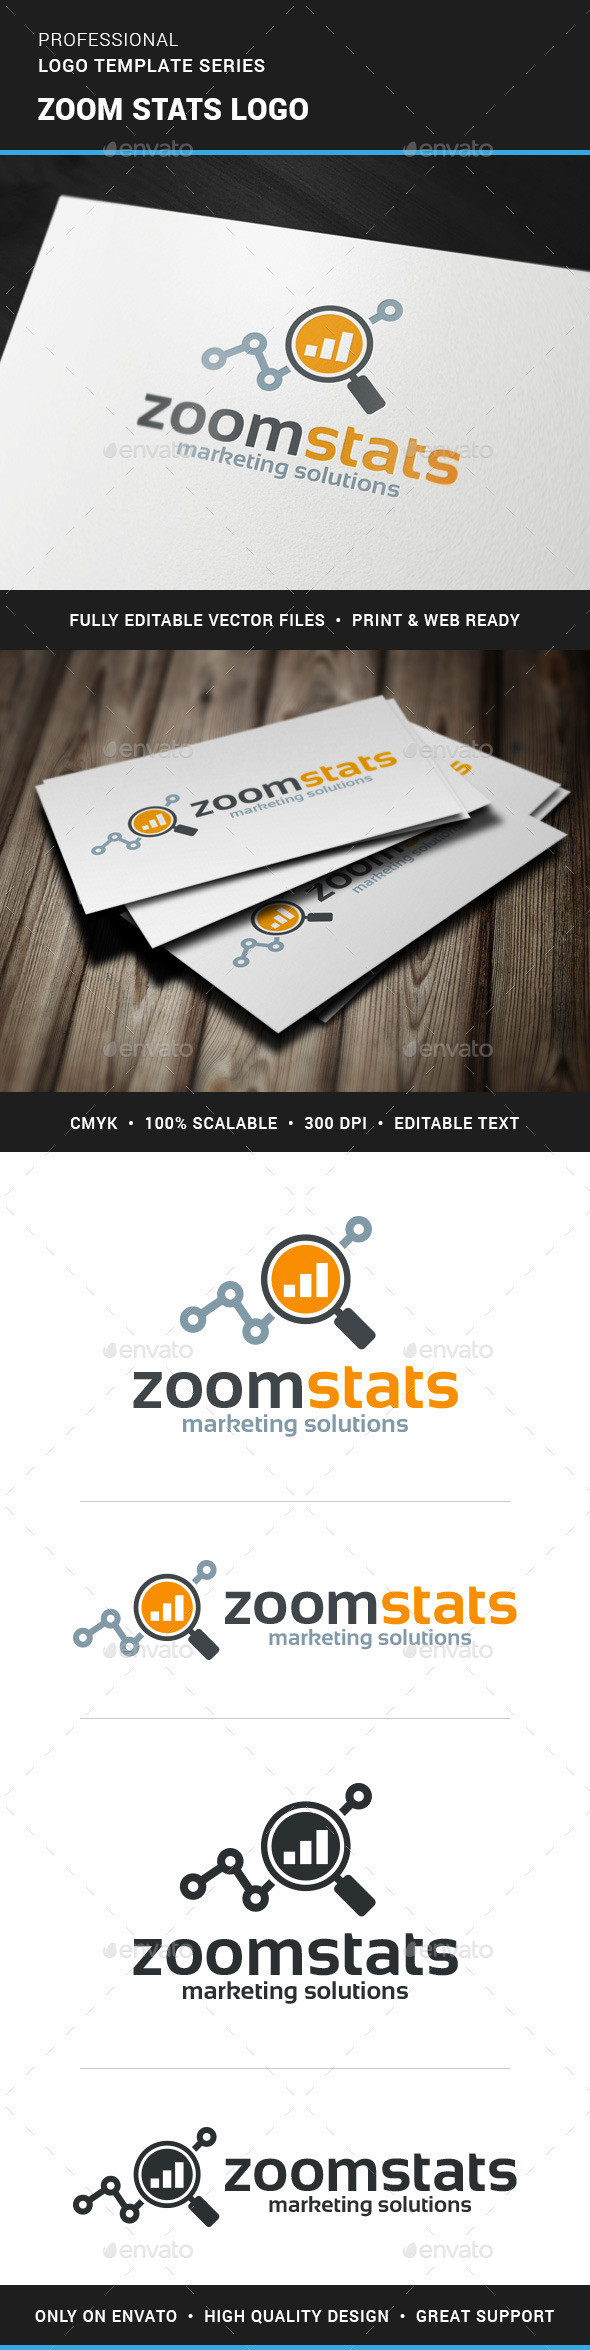 Zoom stats logo template